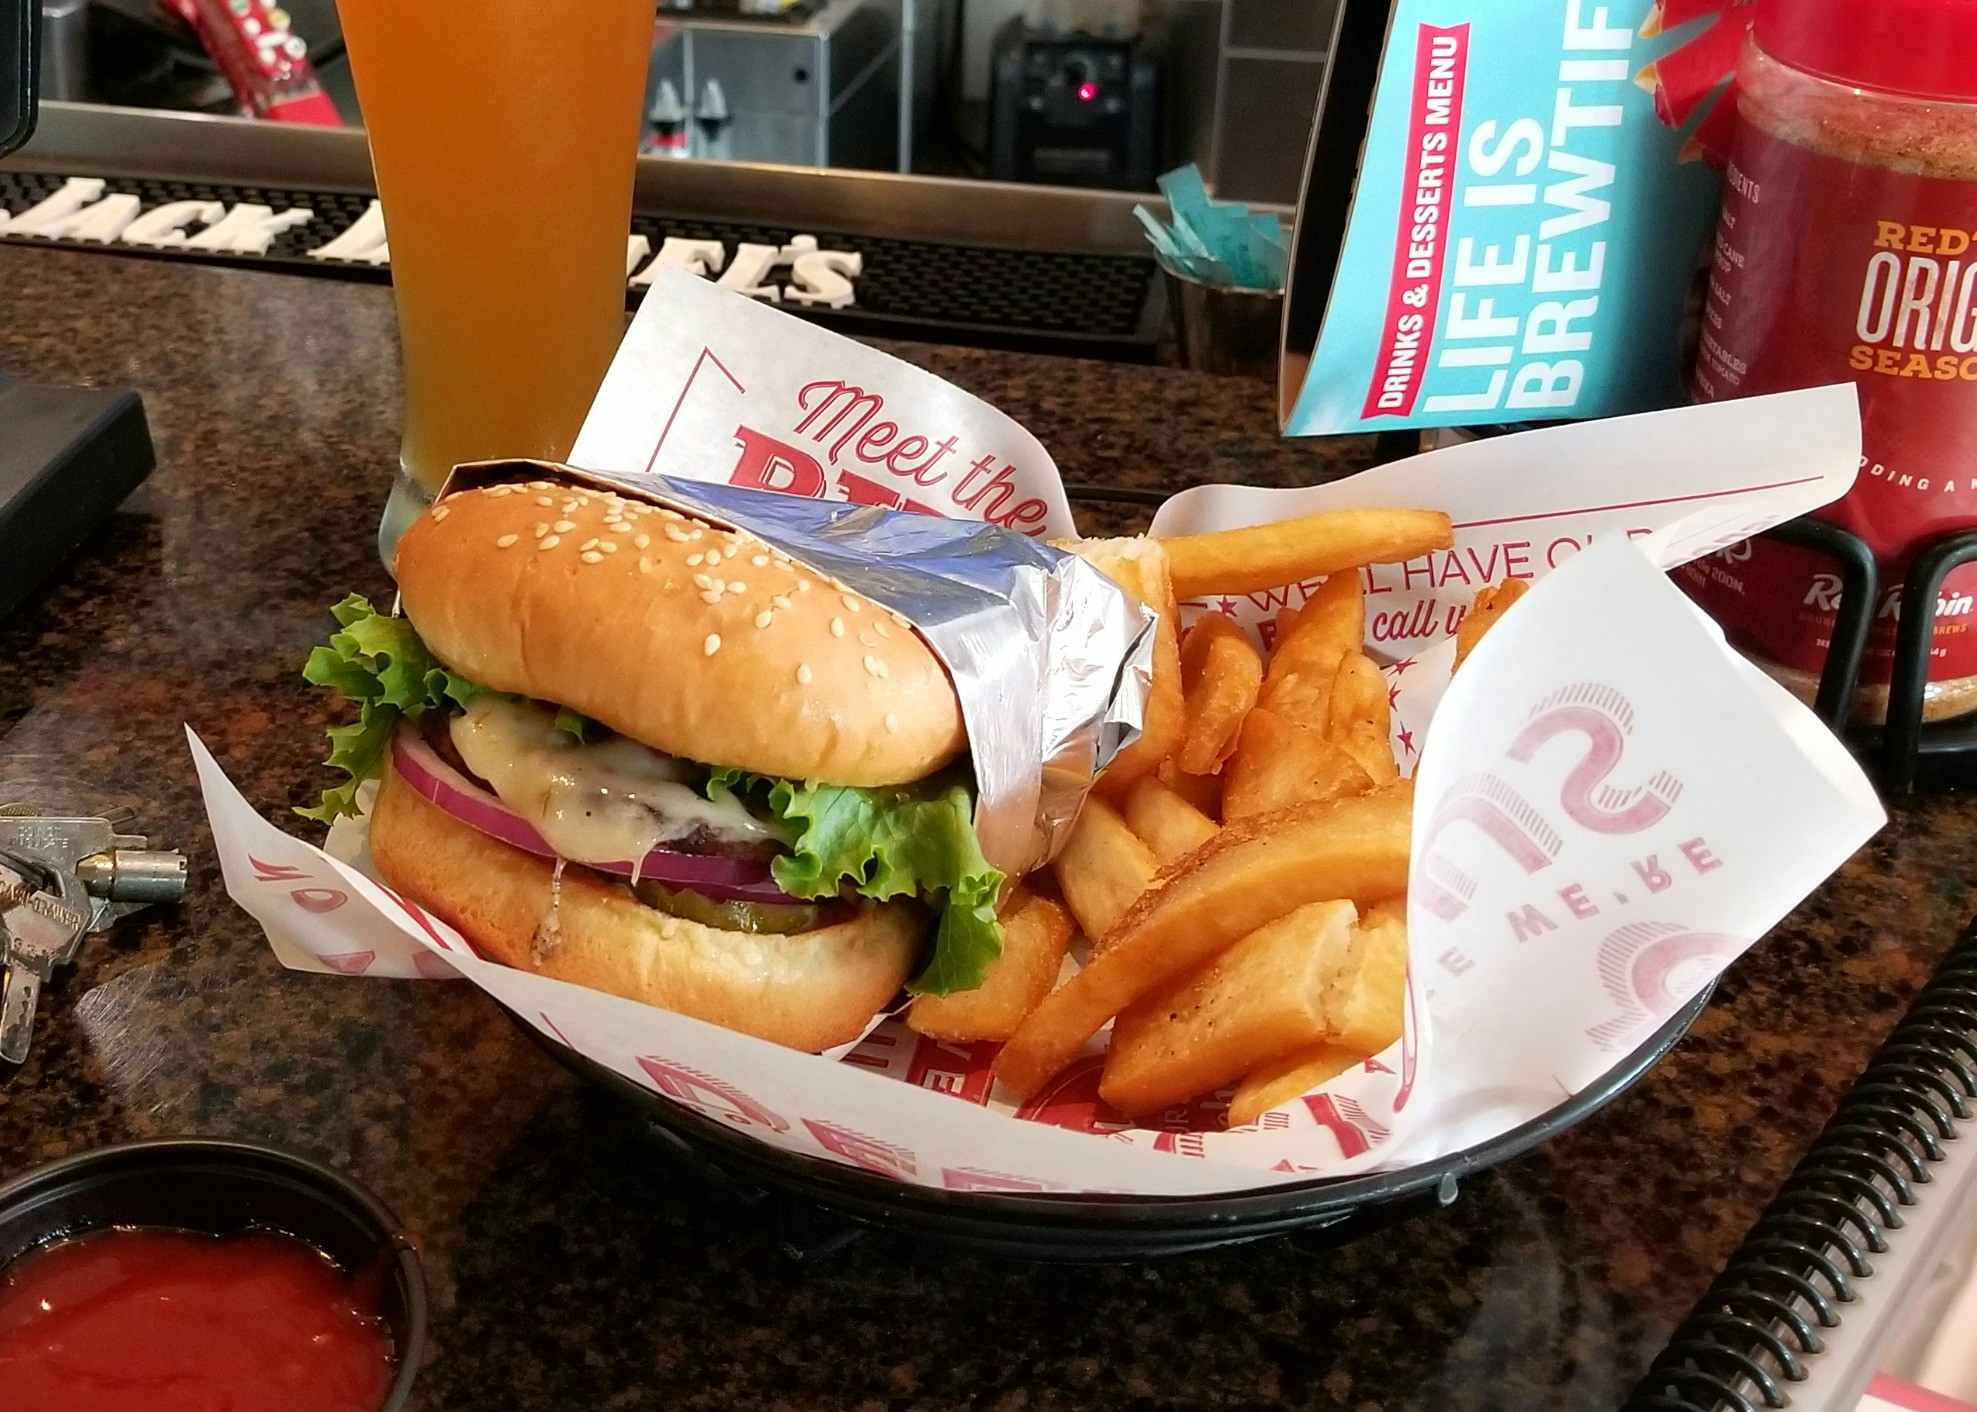 A Red Robin burger in a basket with fries sitting on a table next to a dip cup of ketchup and a beer glass.